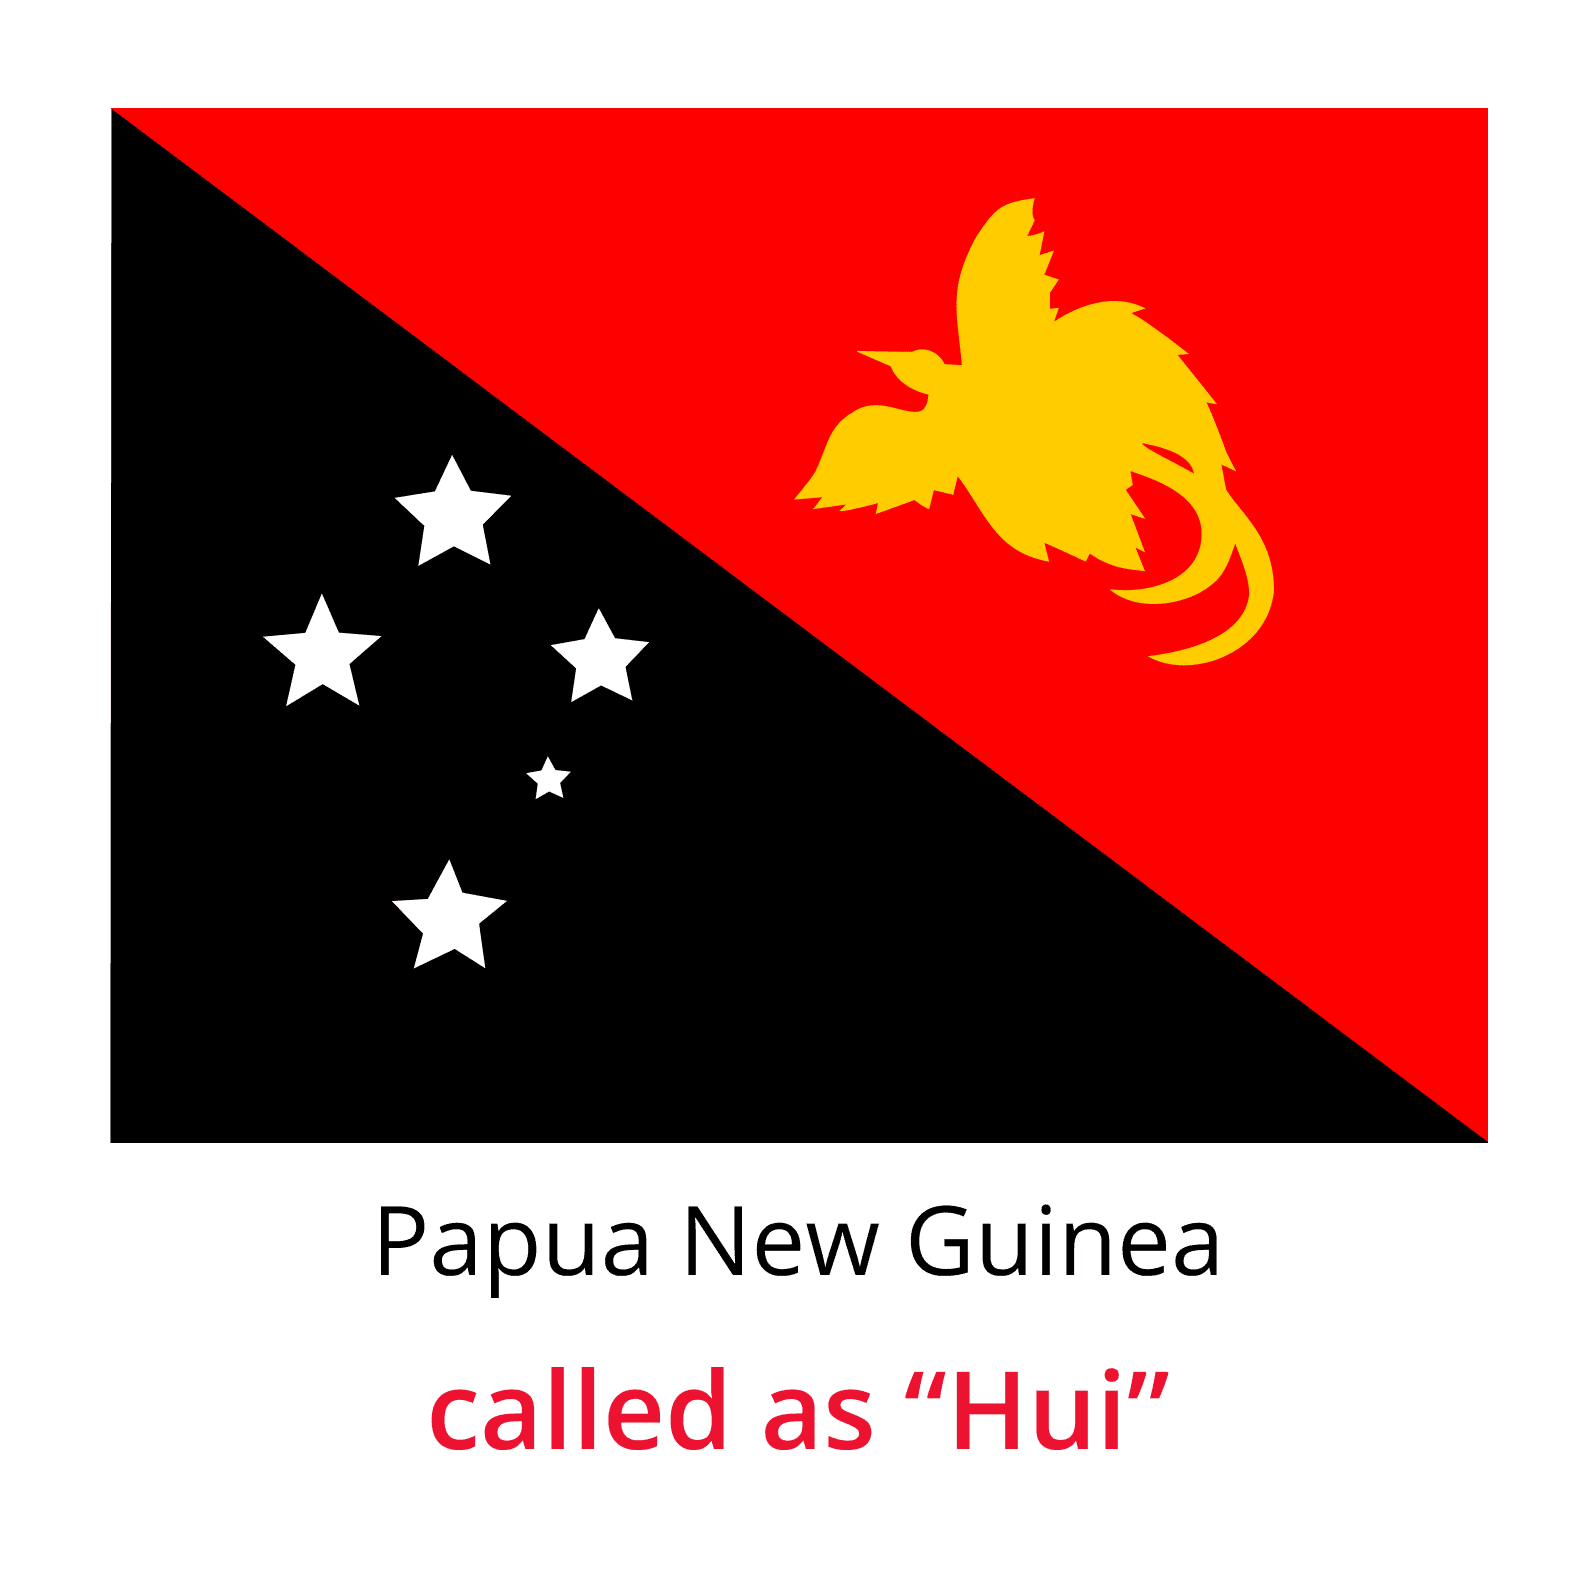 Chit fund Globally-PapuaNewGuinea